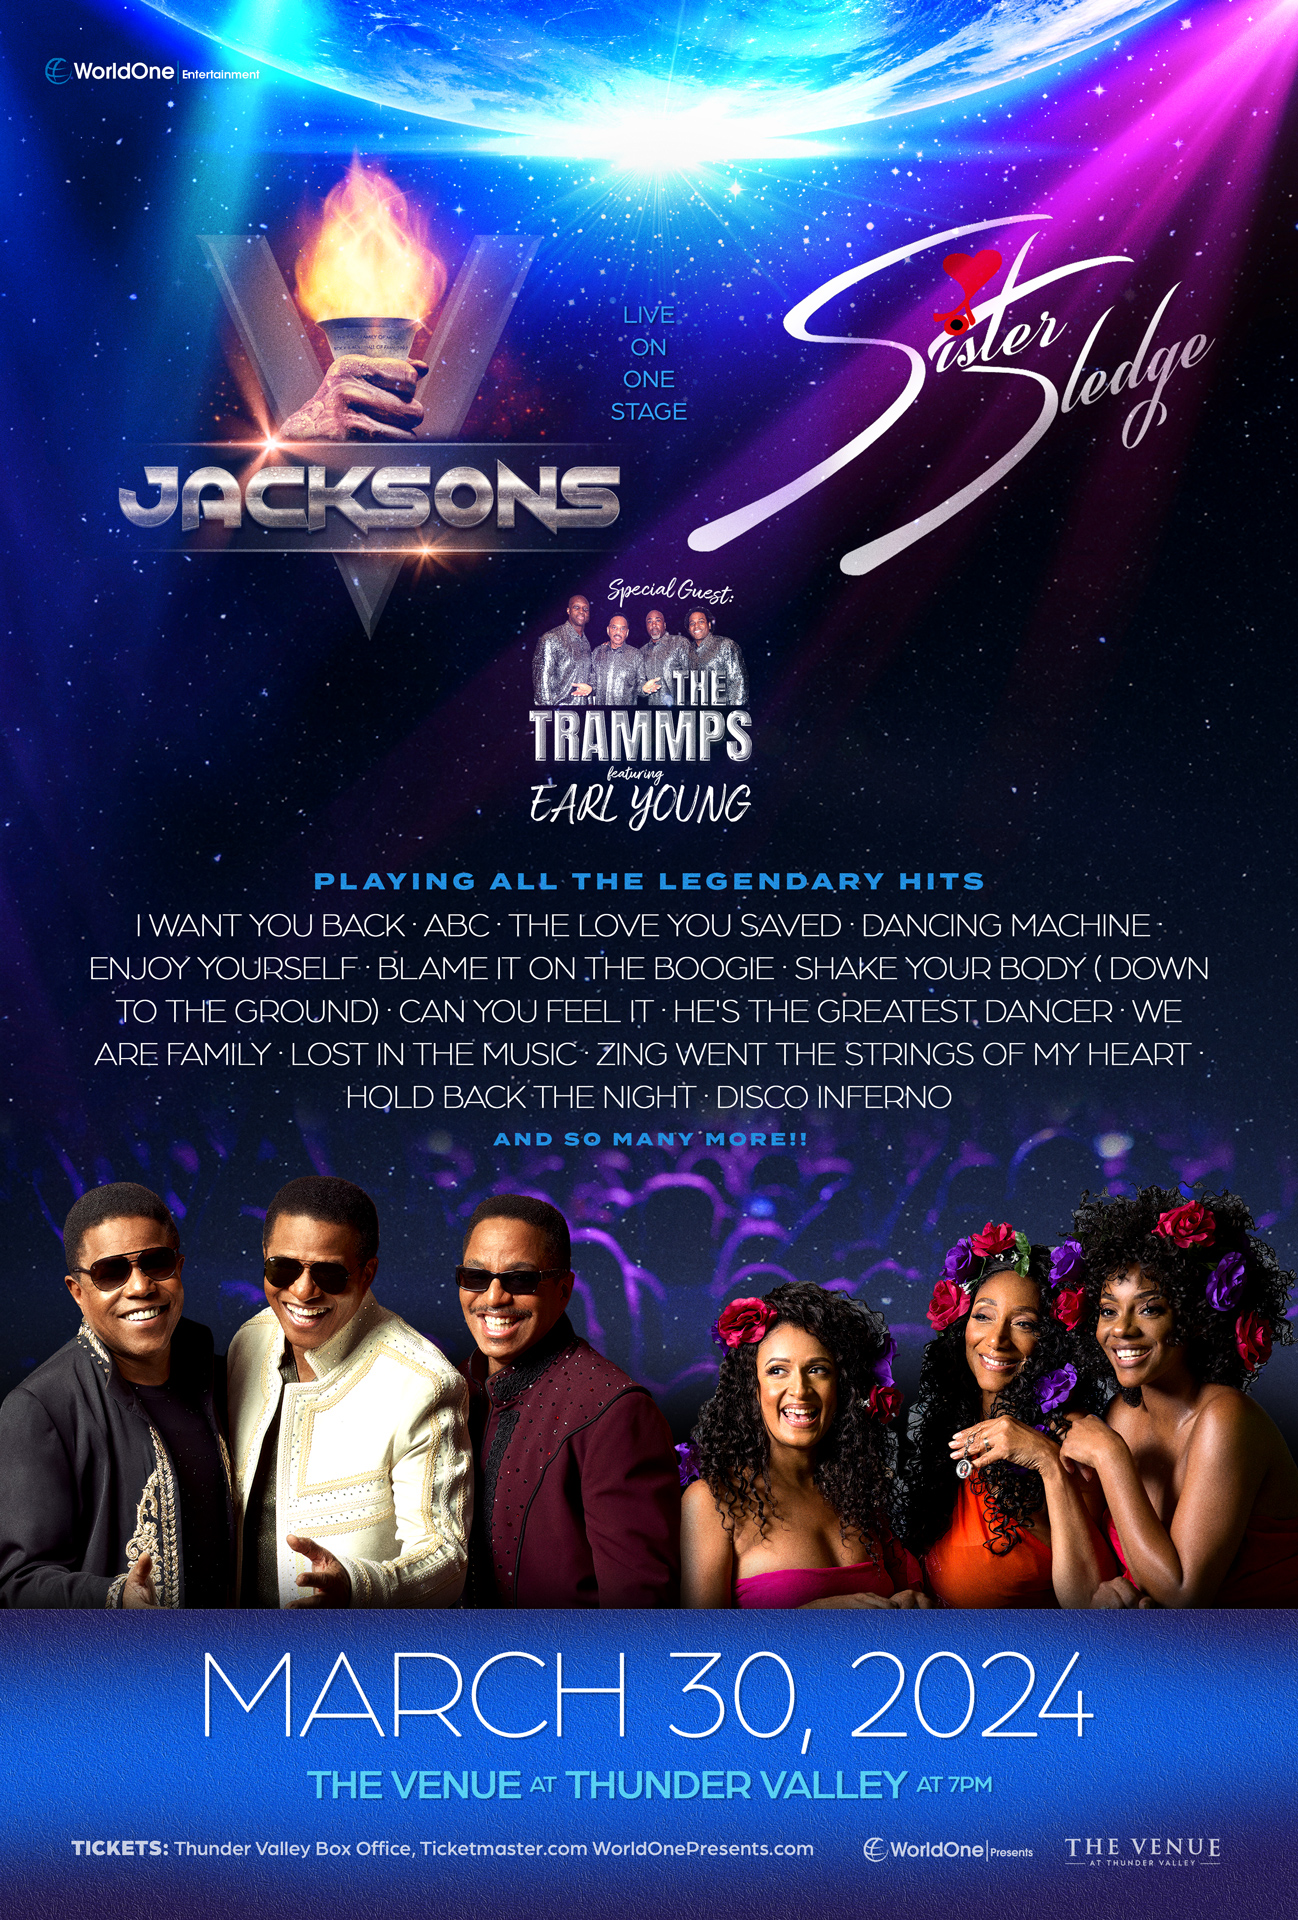 The Jacksons, Sister Sledge & The Trammps featuring Earl Young